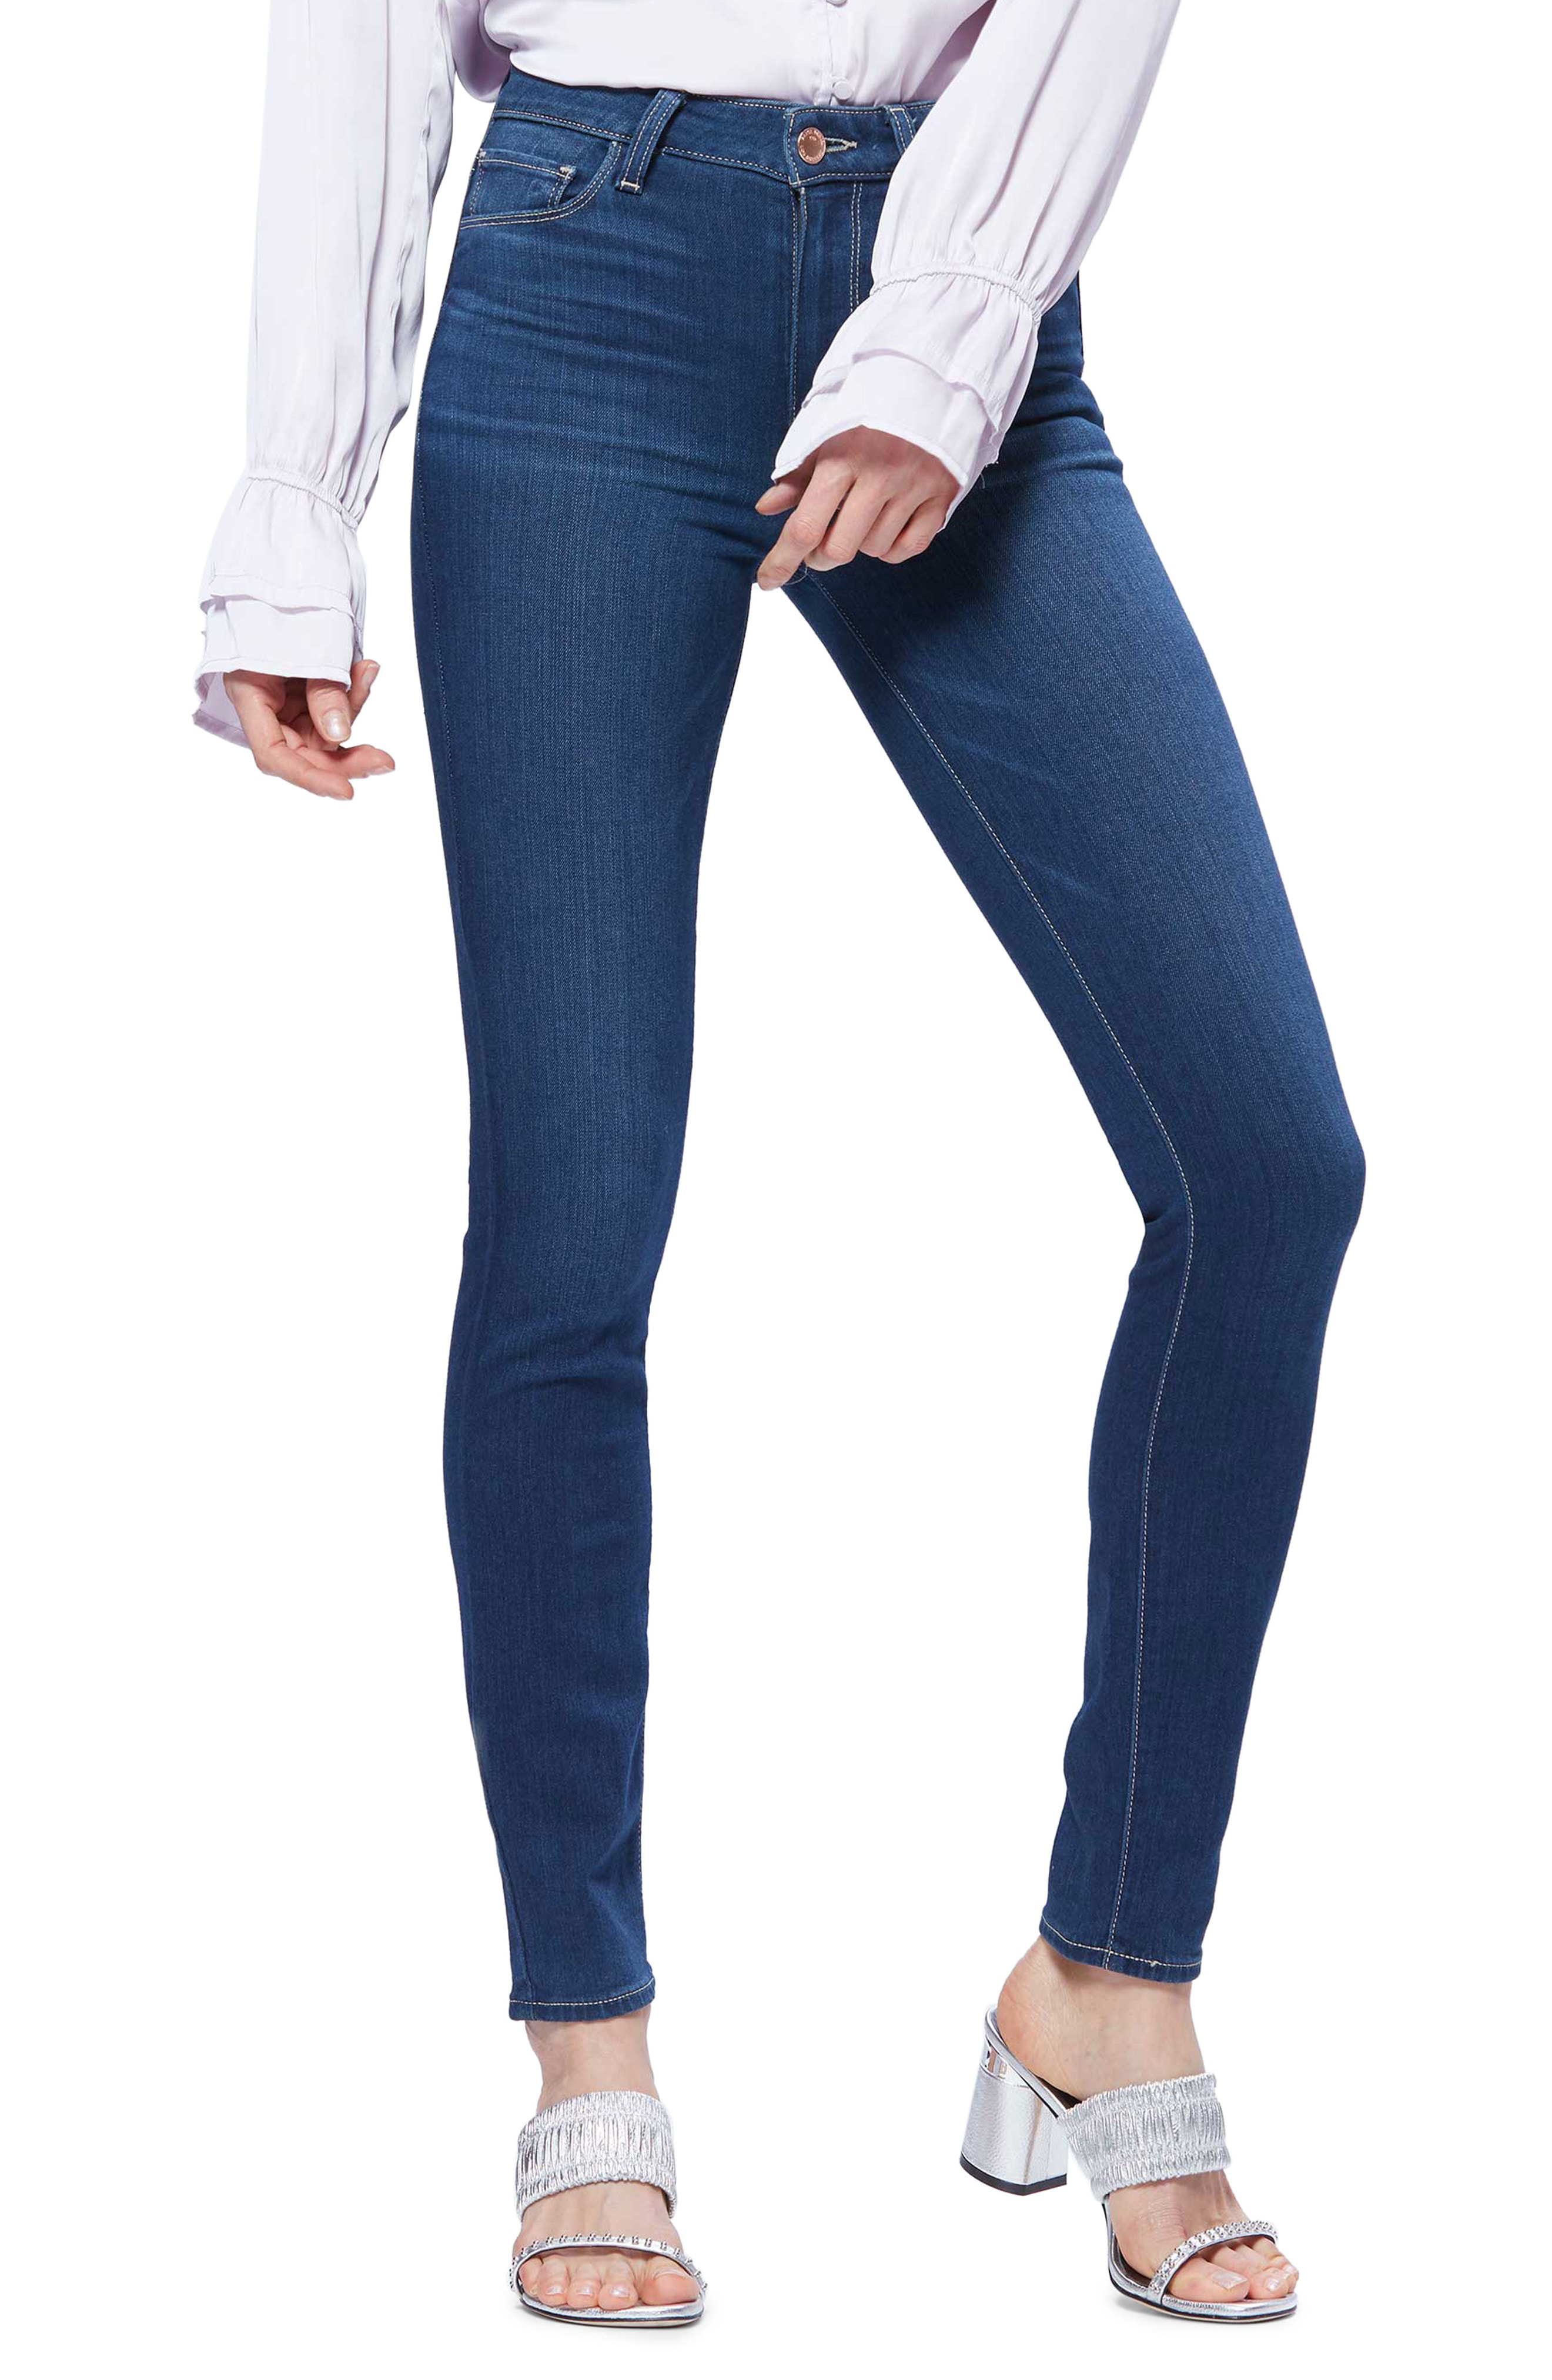 paige hoxton ultra skinny jeans